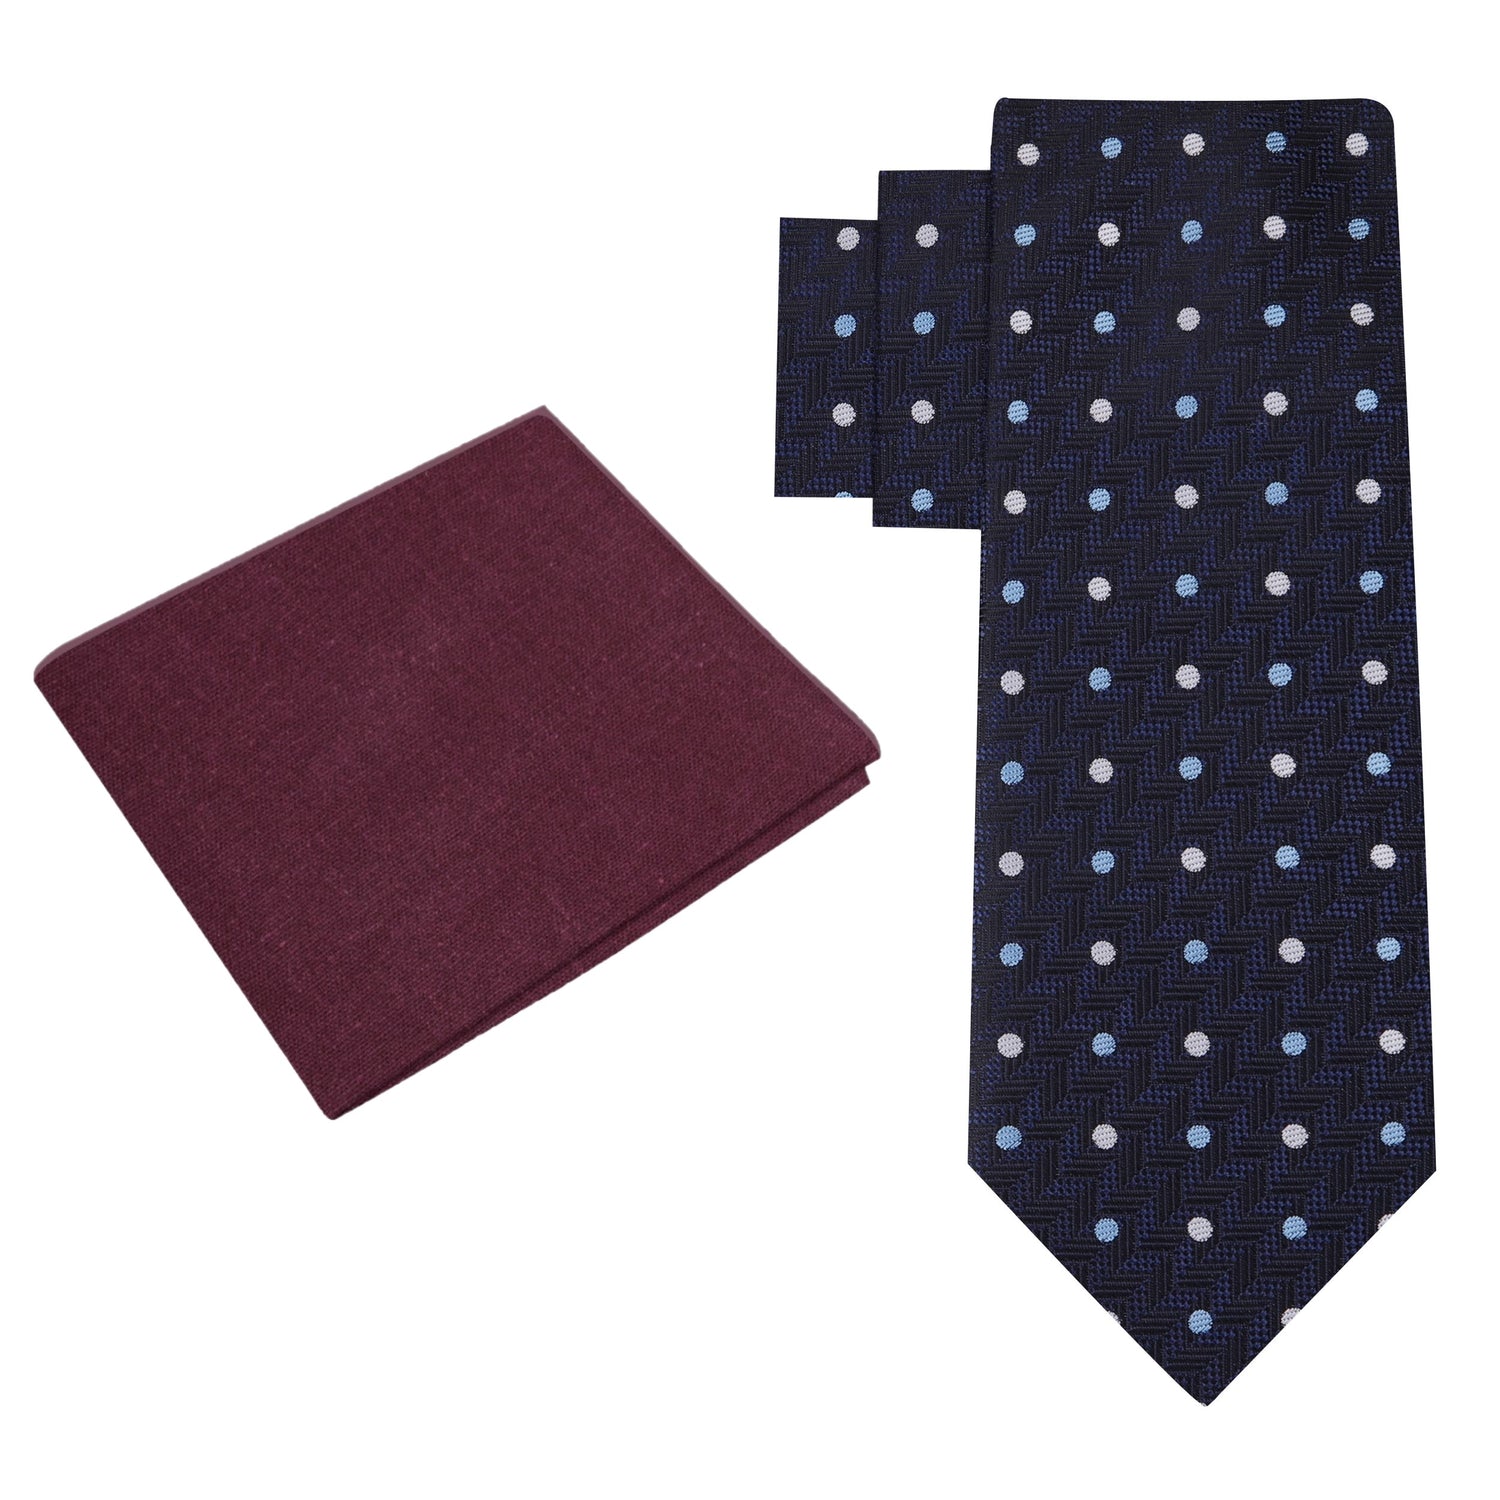 Alt View: Deep Blue, Grey, Light Blue Polka with Herringbone Tie and Deep Red Square